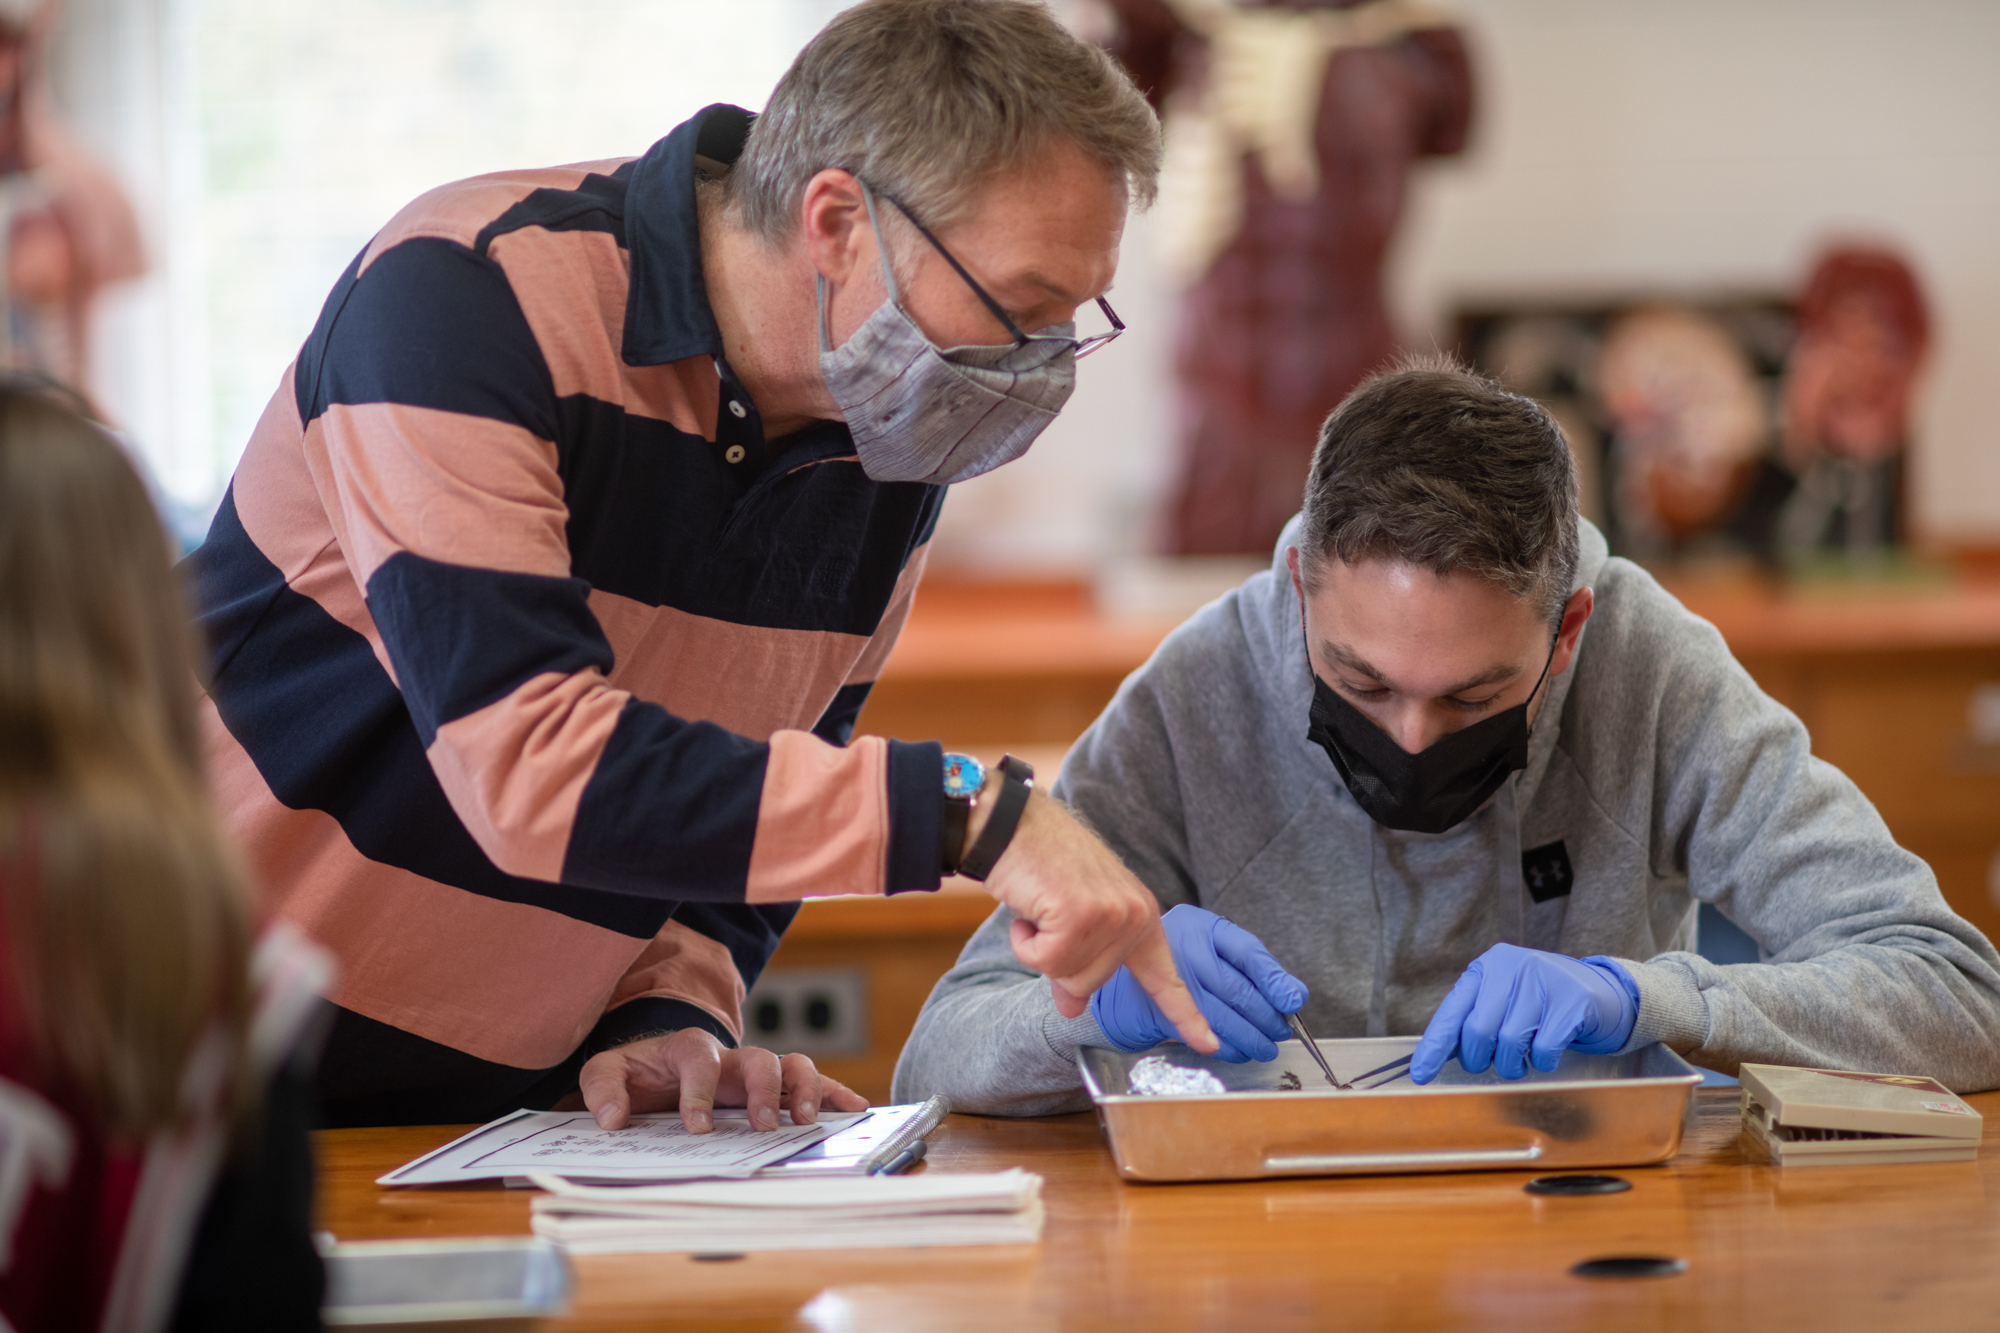 A professor gives guidance to a student while conducting a small animal dissection